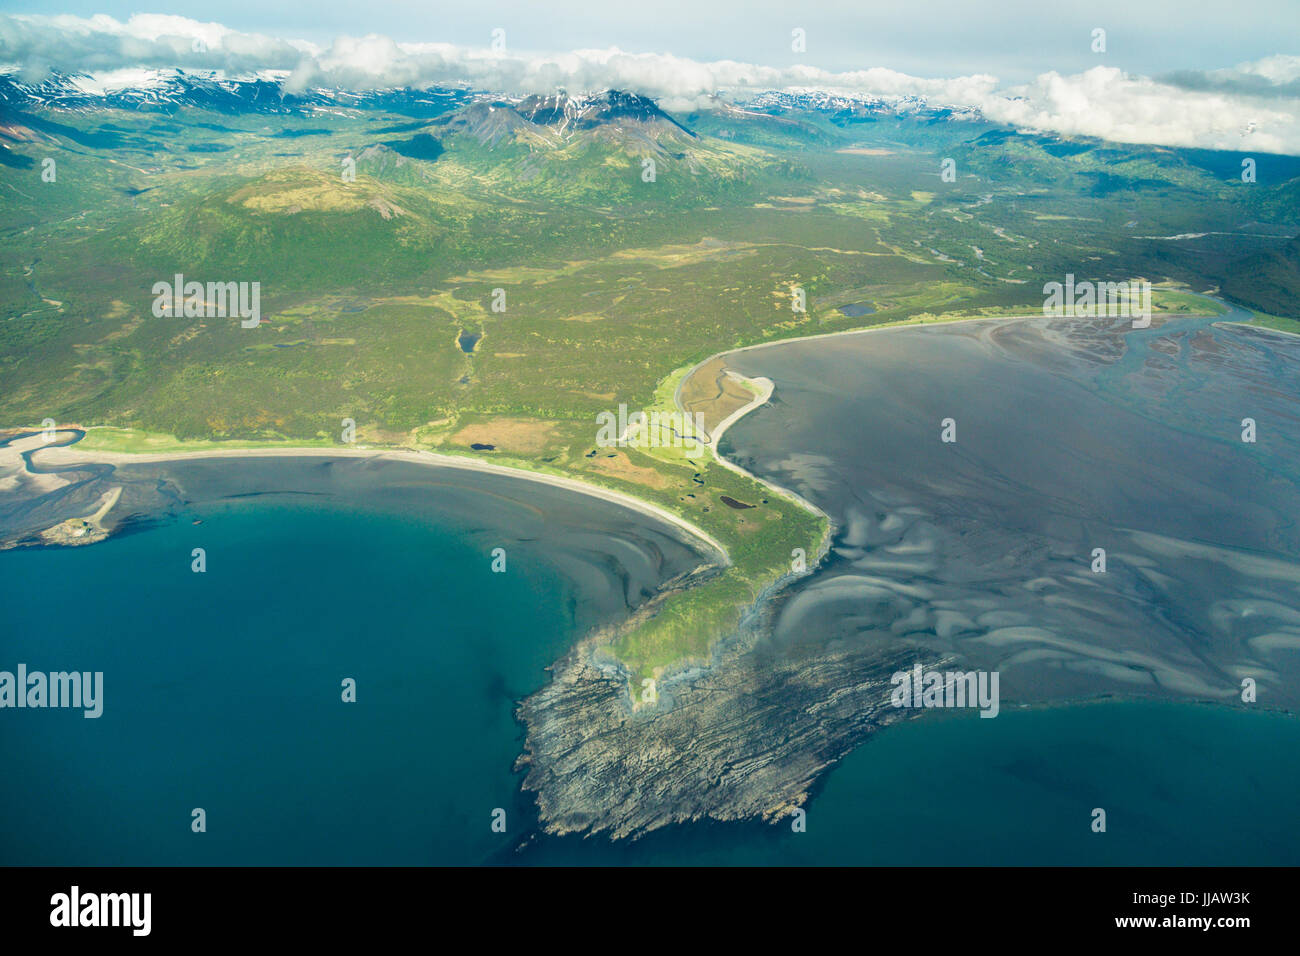 Abstract landscape from above, Cook Inlet, Alaska, USA Stock Photo